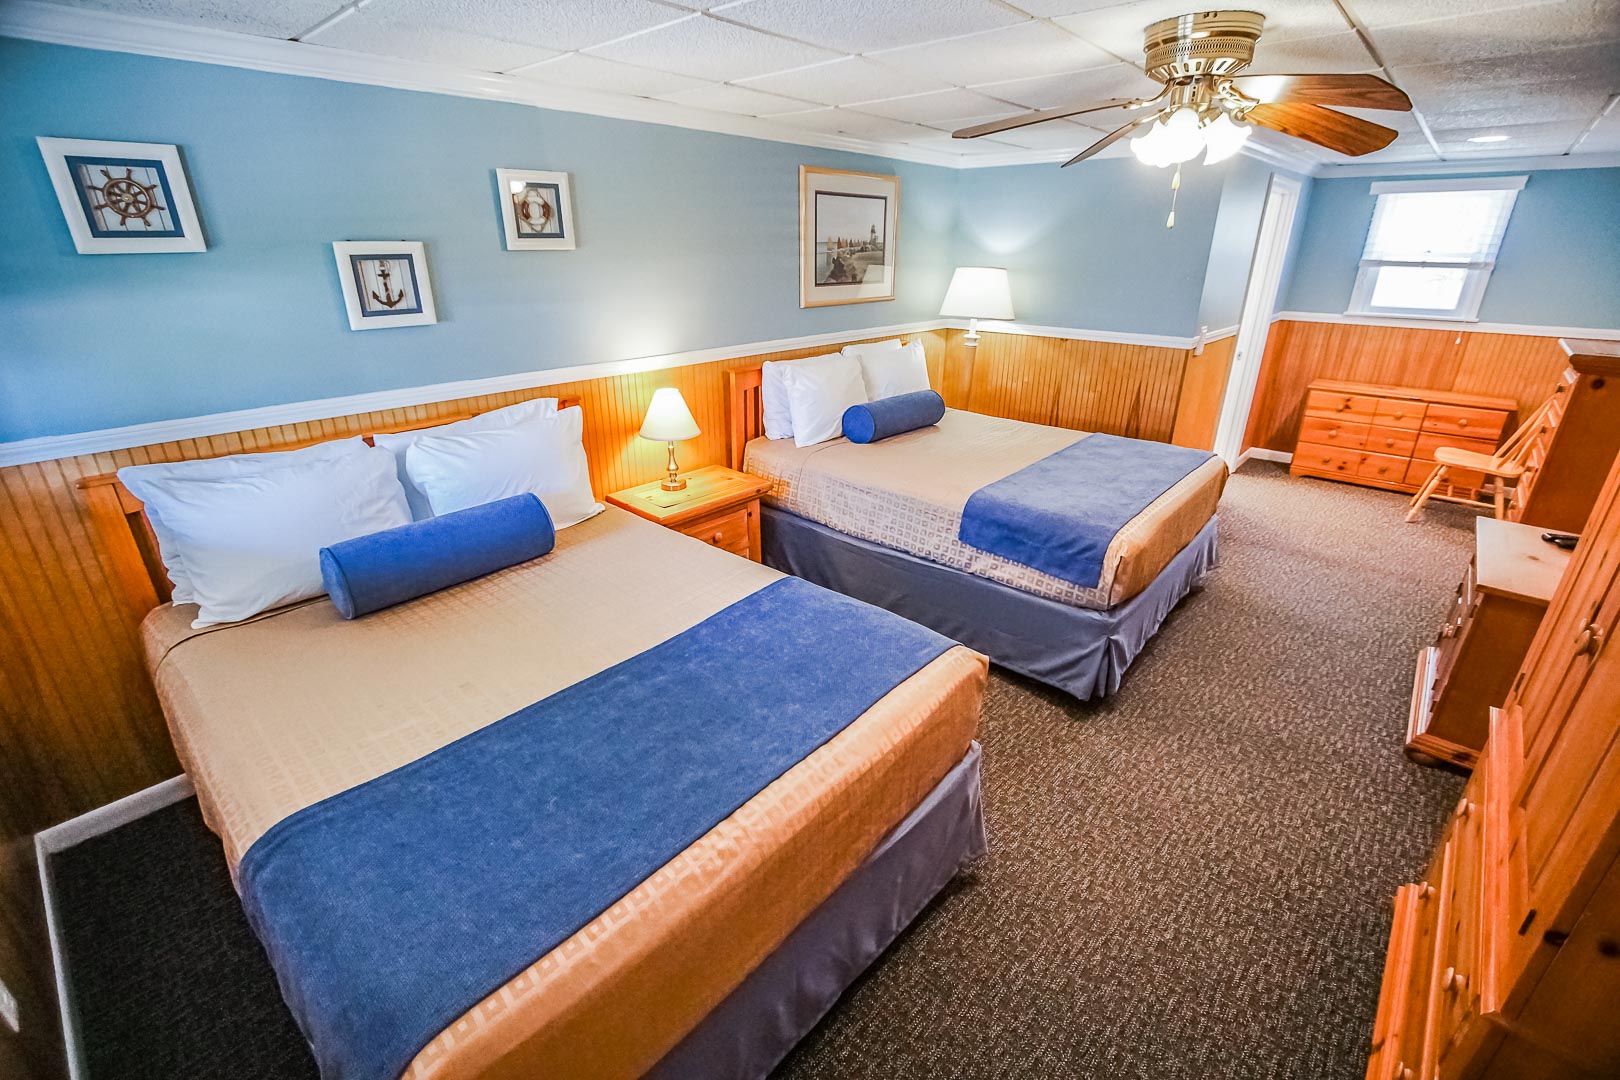 A spacious accommodation with double beds at VRI's Island Manor Resort in Rhode Island.